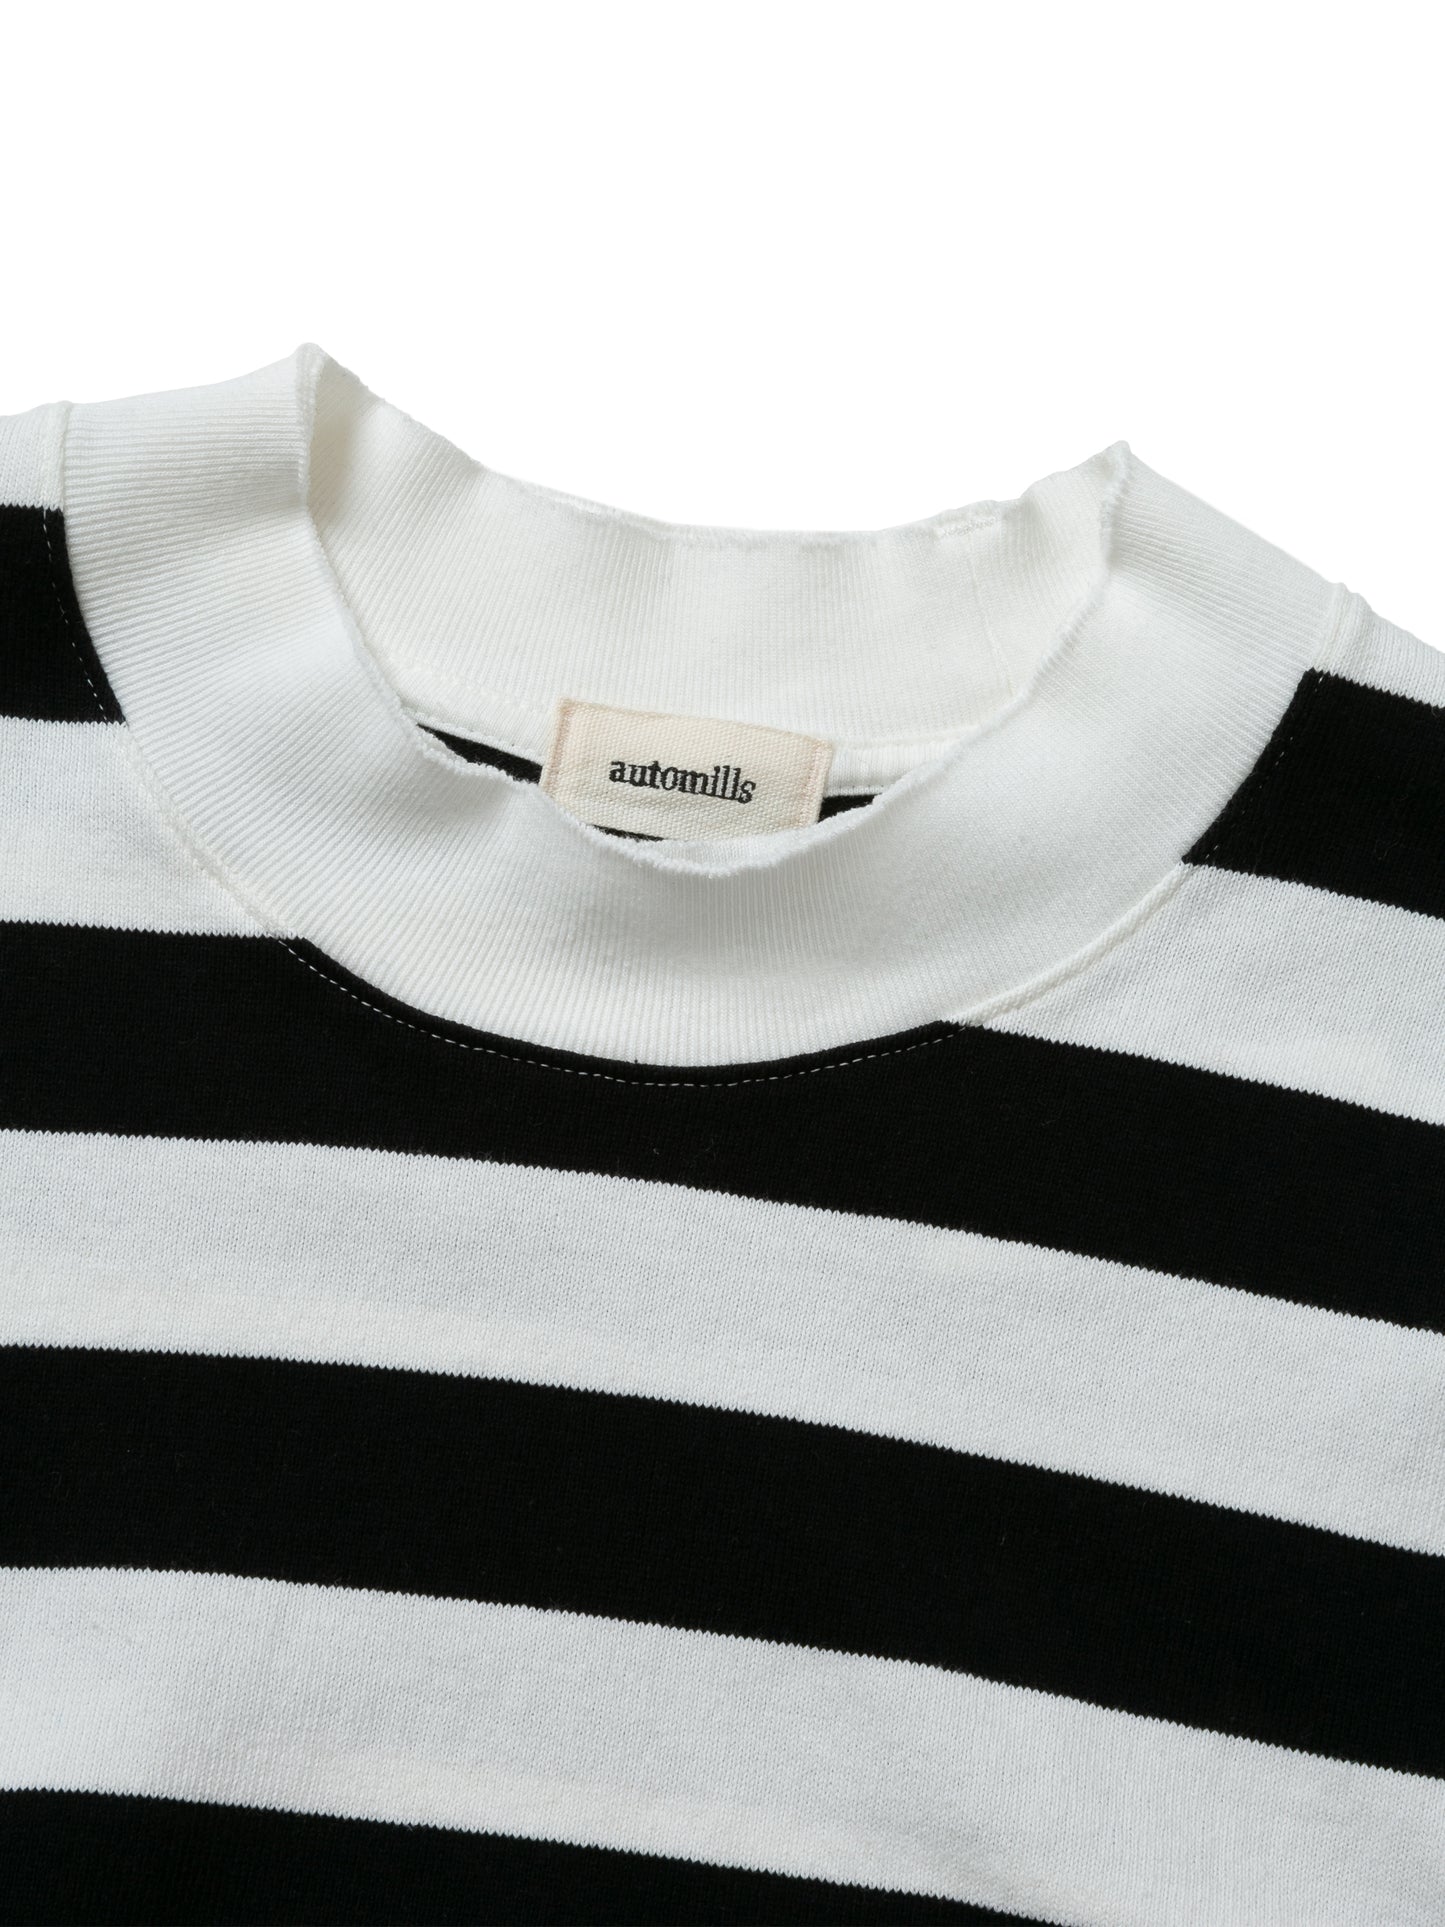 BAGGY L/S TEE COTTON BORDER JERSEY AM-C0104 O.White